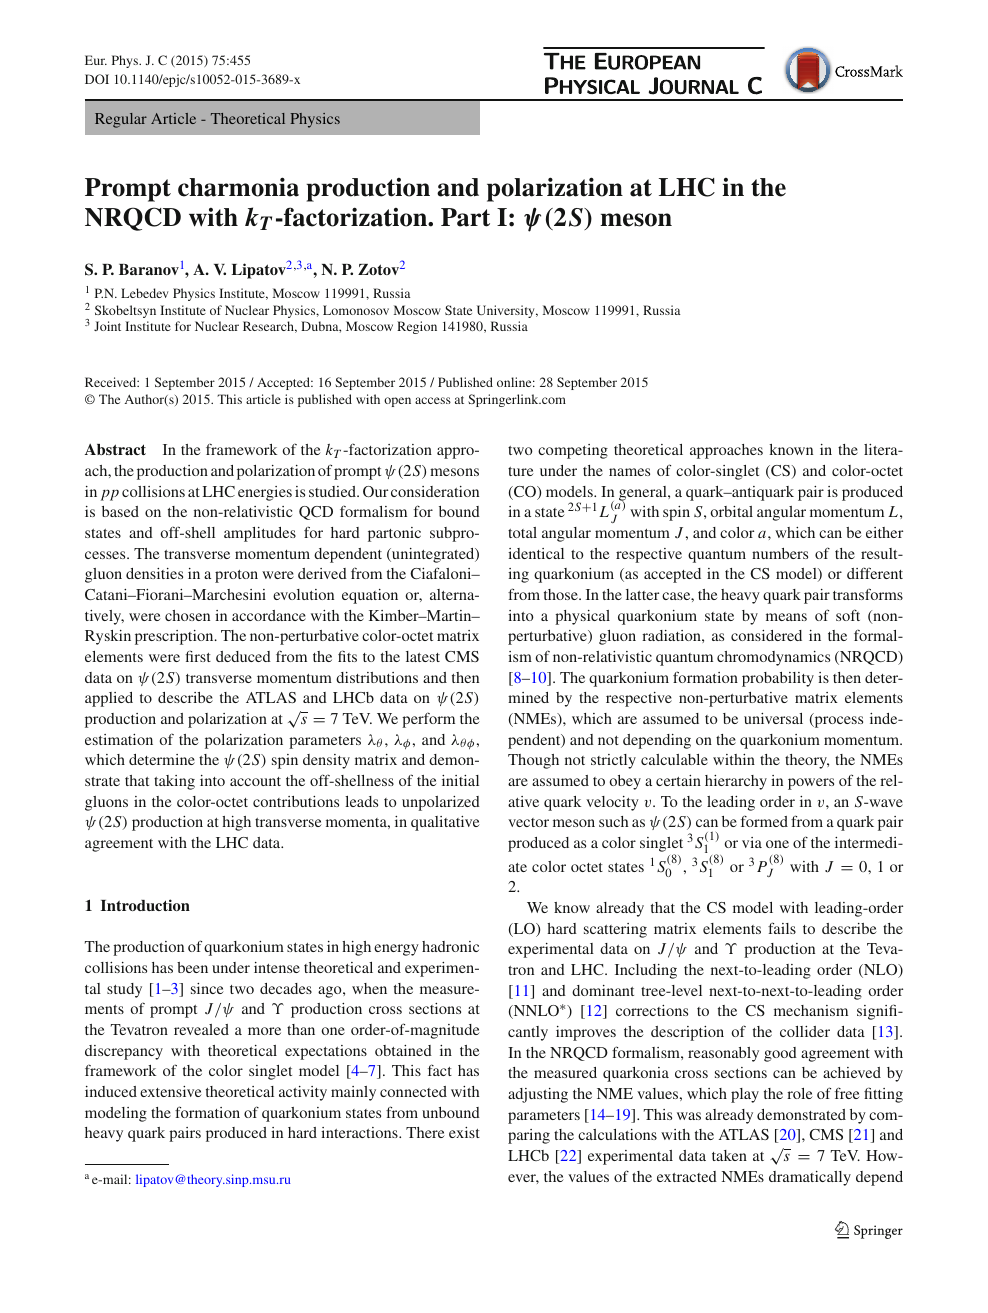 Prompt Charmonia Production And Polarization At Lhc In The Nrqcd With K T K T Factorization Part I Psi 2s Ps 2 S Meson Topic Of Research Paper In Physical